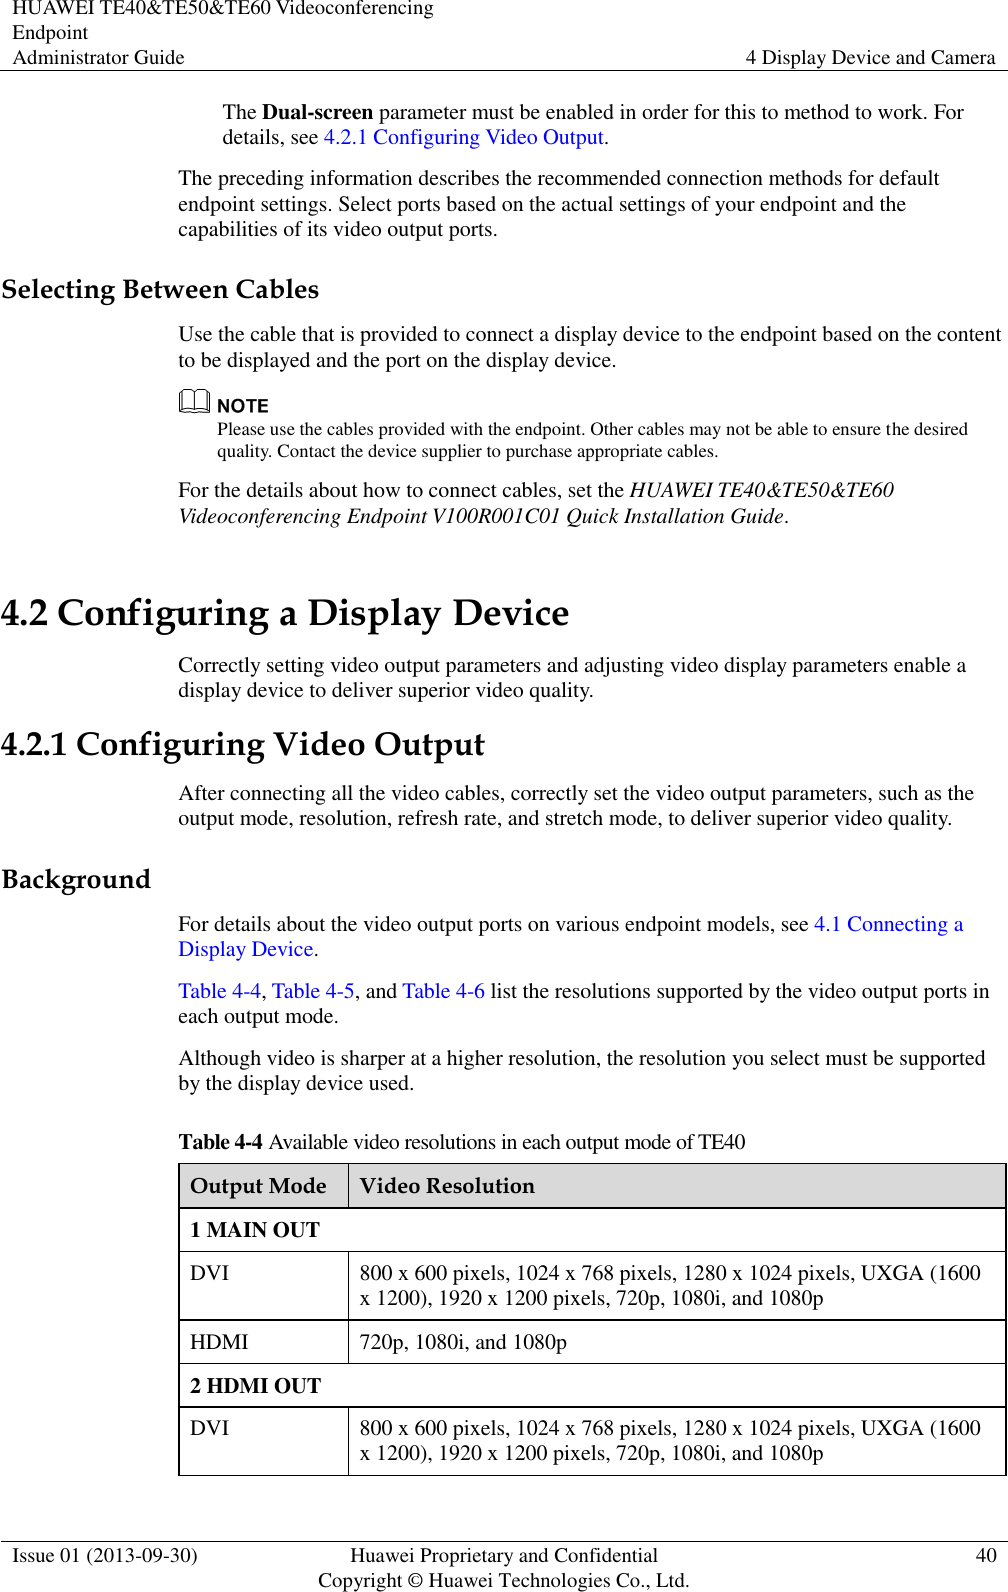 HUAWEI TE40&amp;TE50&amp;TE60 Videoconferencing Endpoint Administrator Guide 4 Display Device and Camera  Issue 01 (2013-09-30) Huawei Proprietary and Confidential                                     Copyright © Huawei Technologies Co., Ltd. 40  The Dual-screen parameter must be enabled in order for this to method to work. For details, see 4.2.1 Configuring Video Output.   The preceding information describes the recommended connection methods for default endpoint settings. Select ports based on the actual settings of your endpoint and the capabilities of its video output ports. Selecting Between Cables Use the cable that is provided to connect a display device to the endpoint based on the content to be displayed and the port on the display device.  Please use the cables provided with the endpoint. Other cables may not be able to ensure the desired quality. Contact the device supplier to purchase appropriate cables. For the details about how to connect cables, set the HUAWEI TE40&amp;TE50&amp;TE60 Videoconferencing Endpoint V100R001C01 Quick Installation Guide. 4.2 Configuring a Display Device Correctly setting video output parameters and adjusting video display parameters enable a display device to deliver superior video quality. 4.2.1 Configuring Video Output After connecting all the video cables, correctly set the video output parameters, such as the output mode, resolution, refresh rate, and stretch mode, to deliver superior video quality.   Background For details about the video output ports on various endpoint models, see 4.1 Connecting a Display Device.   Table 4-4, Table 4-5, and Table 4-6 list the resolutions supported by the video output ports in each output mode.   Although video is sharper at a higher resolution, the resolution you select must be supported by the display device used.   Table 4-4 Available video resolutions in each output mode of TE40 Output Mode Video Resolution 1 MAIN OUT DVI 800 x 600 pixels, 1024 x 768 pixels, 1280 x 1024 pixels, UXGA (1600 x 1200), 1920 x 1200 pixels, 720p, 1080i, and 1080p HDMI 720p, 1080i, and 1080p 2 HDMI OUT DVI 800 x 600 pixels, 1024 x 768 pixels, 1280 x 1024 pixels, UXGA (1600 x 1200), 1920 x 1200 pixels, 720p, 1080i, and 1080p 